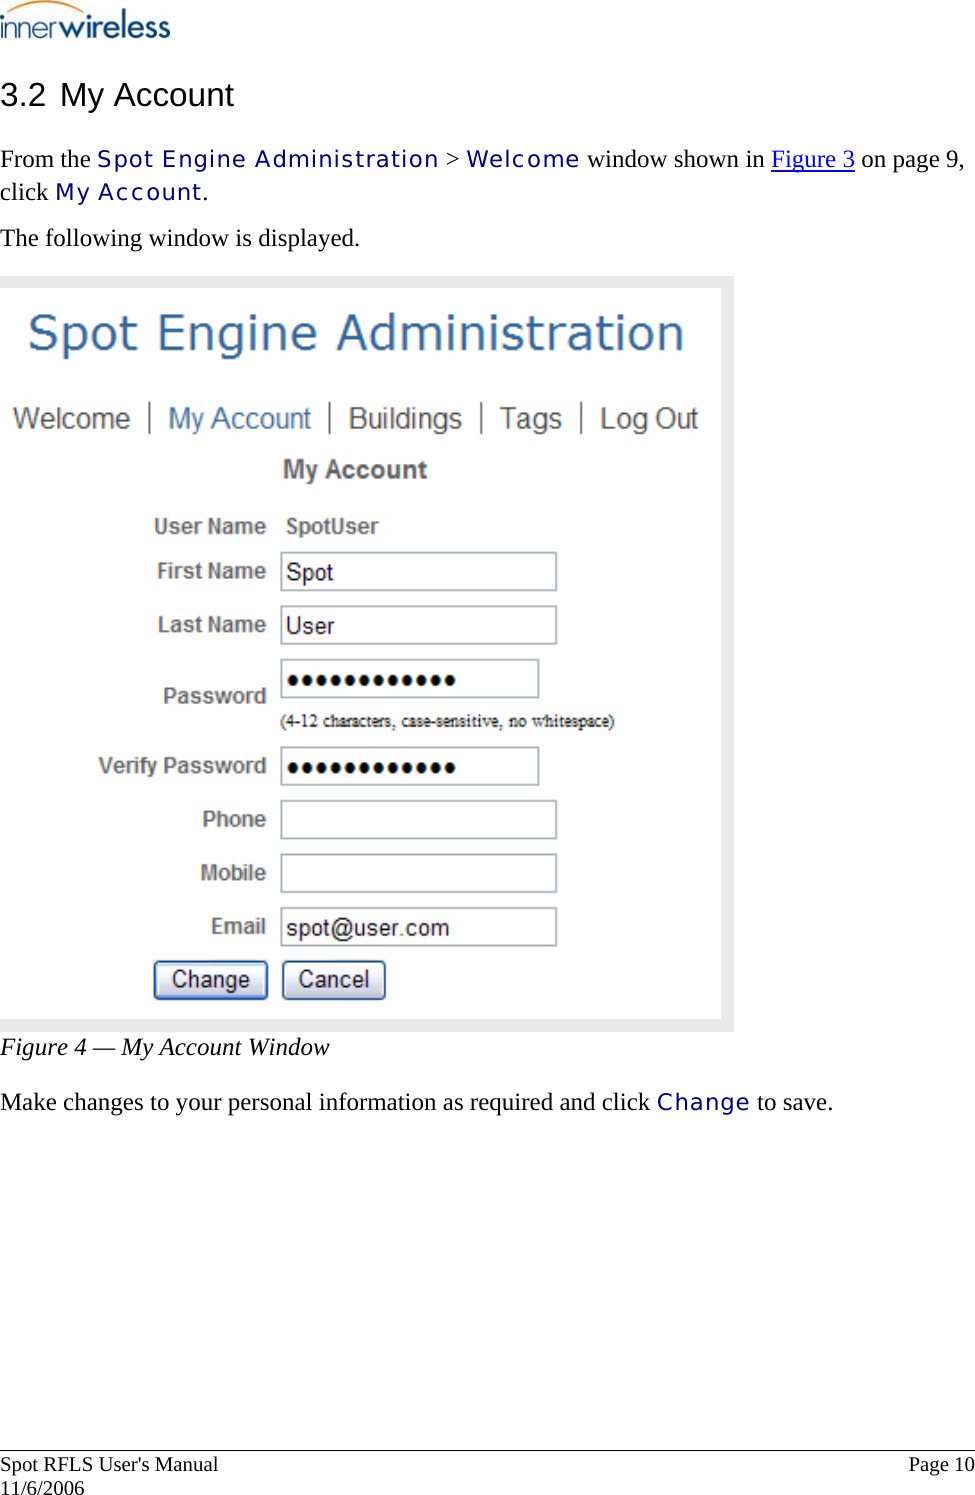       Spot RFLS User&apos;s Manual  Page 10   11/6/2006 3.2 My Account From the Spot Engine Administration &gt; Welcome window shown in Figure 3 on page 9, click My Account. The following window is displayed.  Figure 4 — My Account Window Make changes to your personal information as required and click Change to save.  